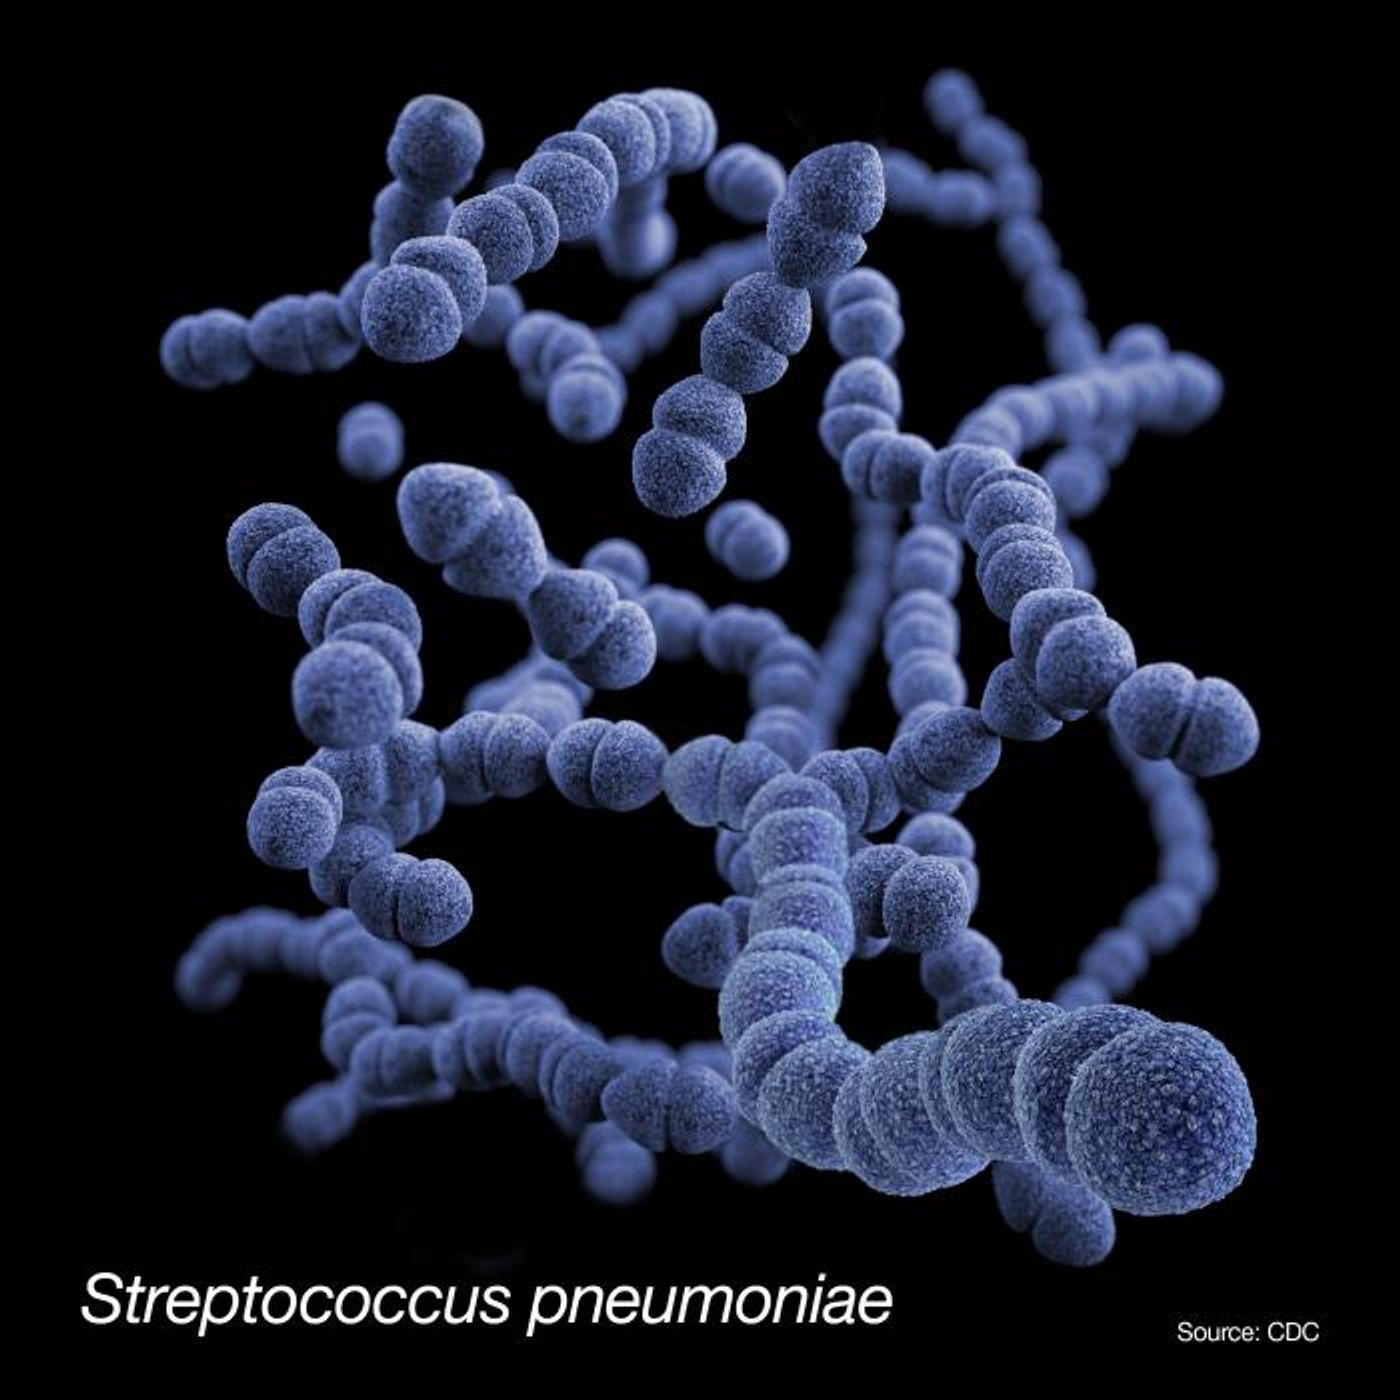 A computer-generated illustration of a group of Gram-positive, Streptococcus pneumoniae bacteria based on SEM imagery and included in CDC's Antibiotic Resistance Threats in the United States, 2019  / Credit: CDC/ Antibiotic Resistance Coordination and Strategy Unit / Photo: Dan Higgins - Medical Illustrator